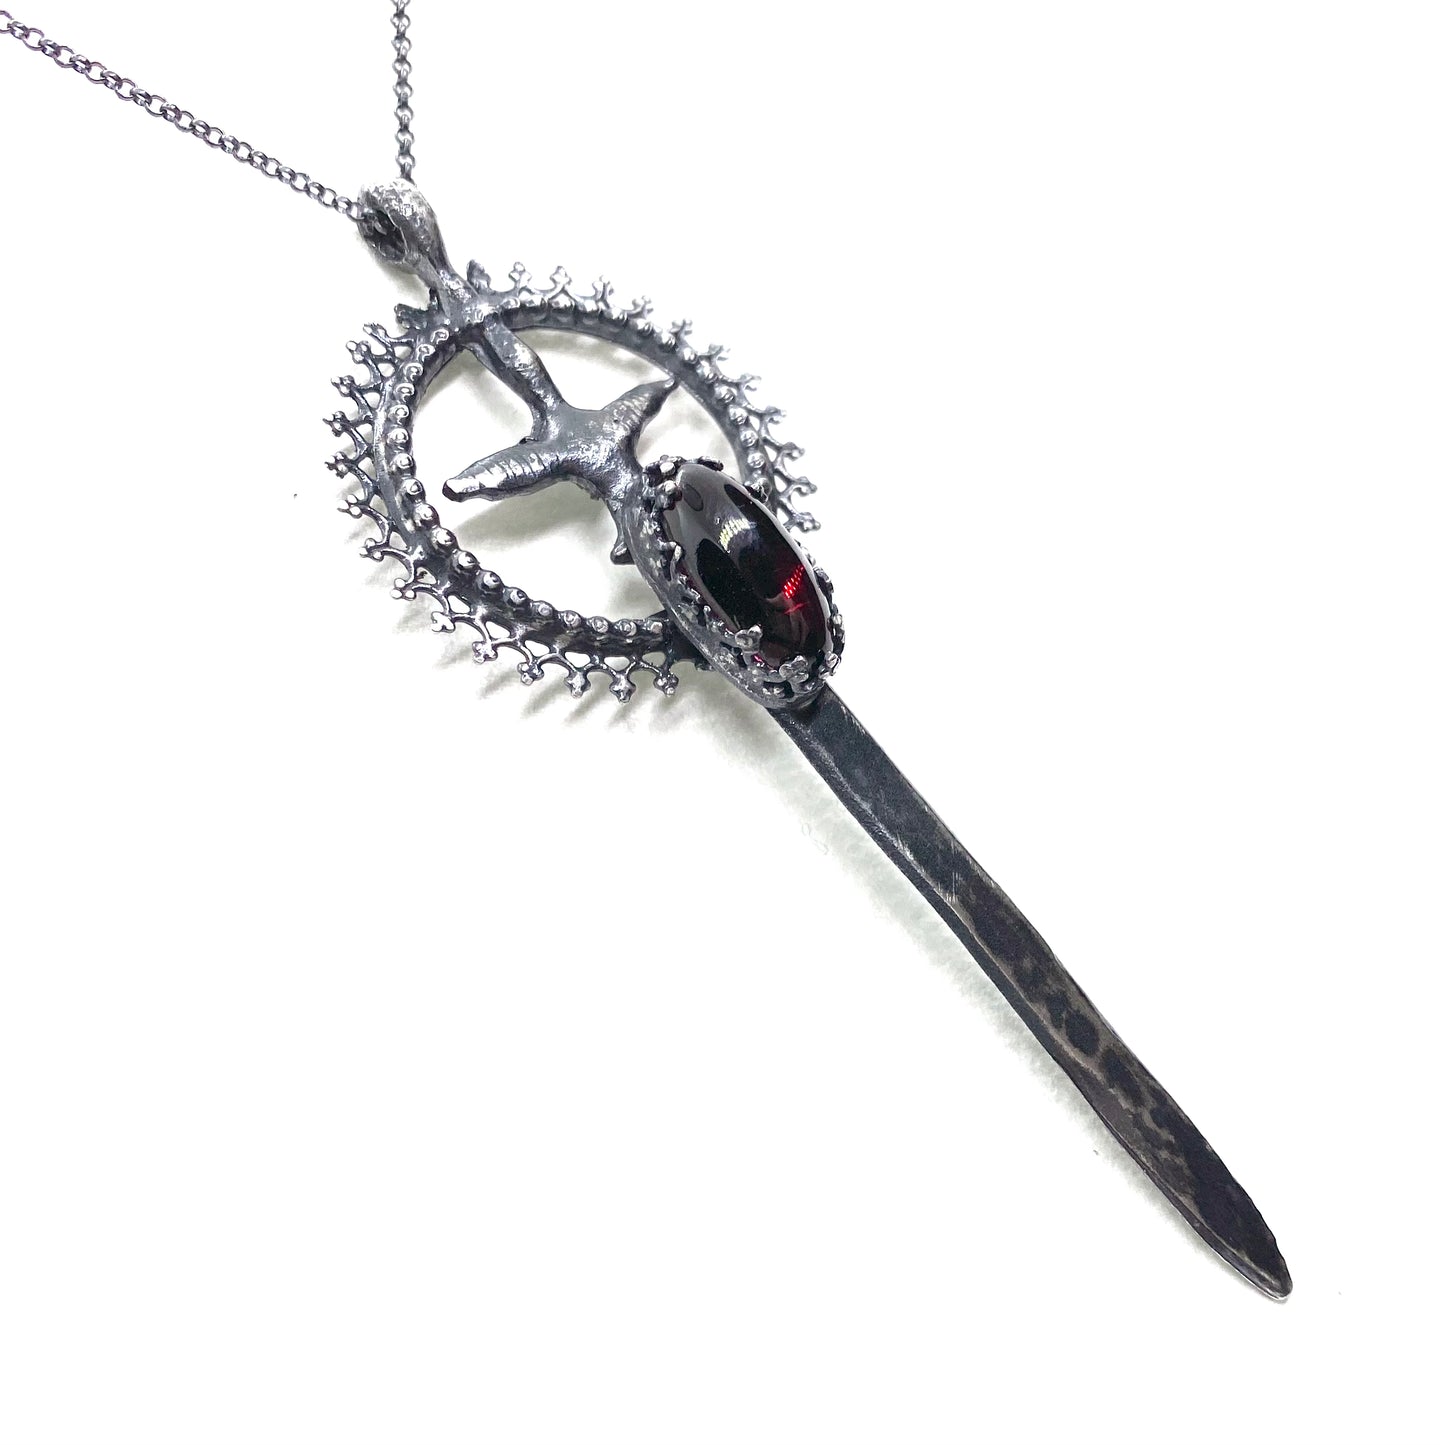 Excalibur Sword Necklace in Sterling Silver and Garnet